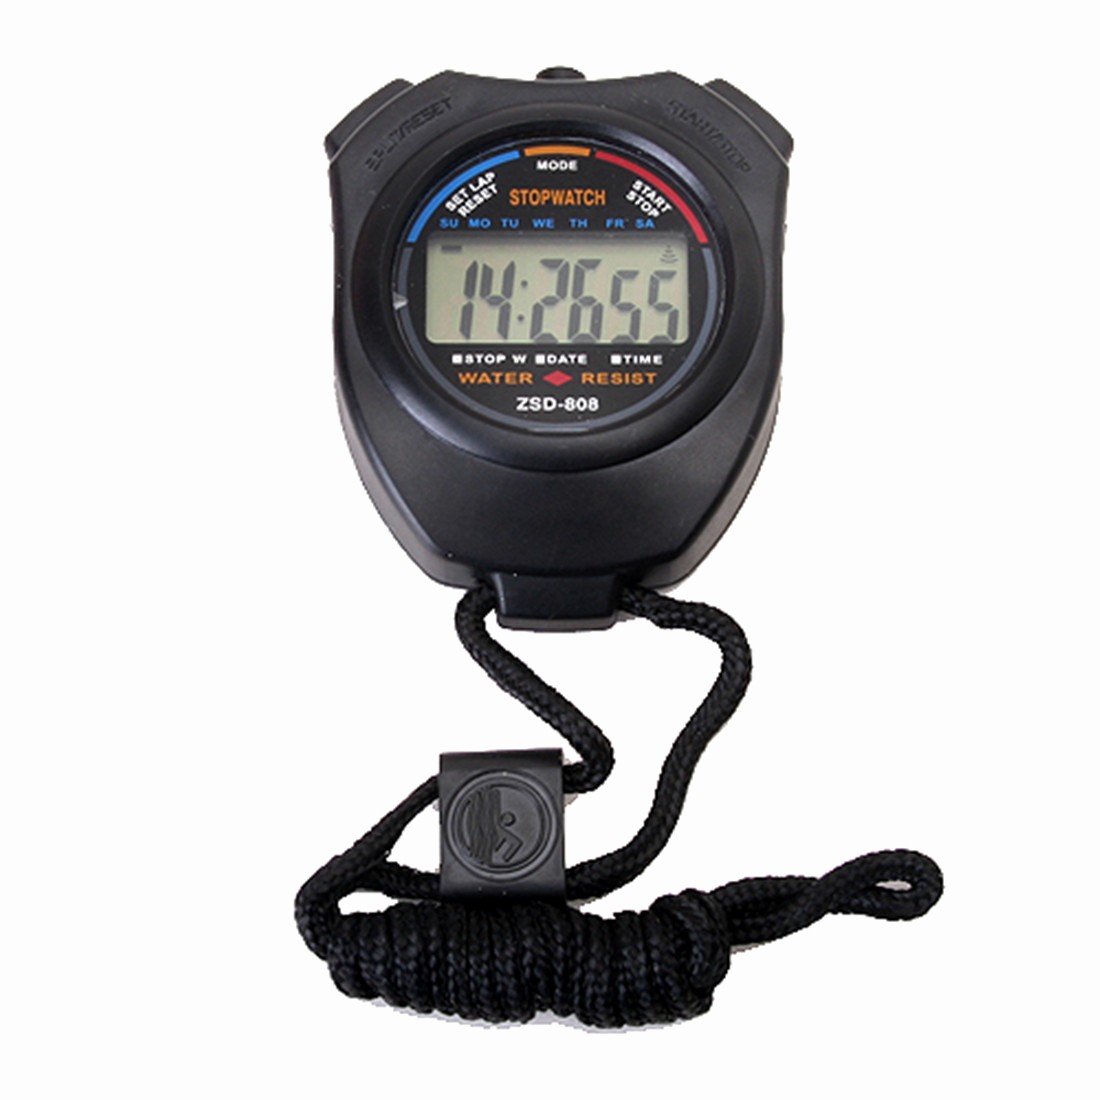 Set Stopwatch for 5 Minutes Lovely Stopwatch Stop Watch Lcd Digital Pro End 3 16 2018 8 15 Am